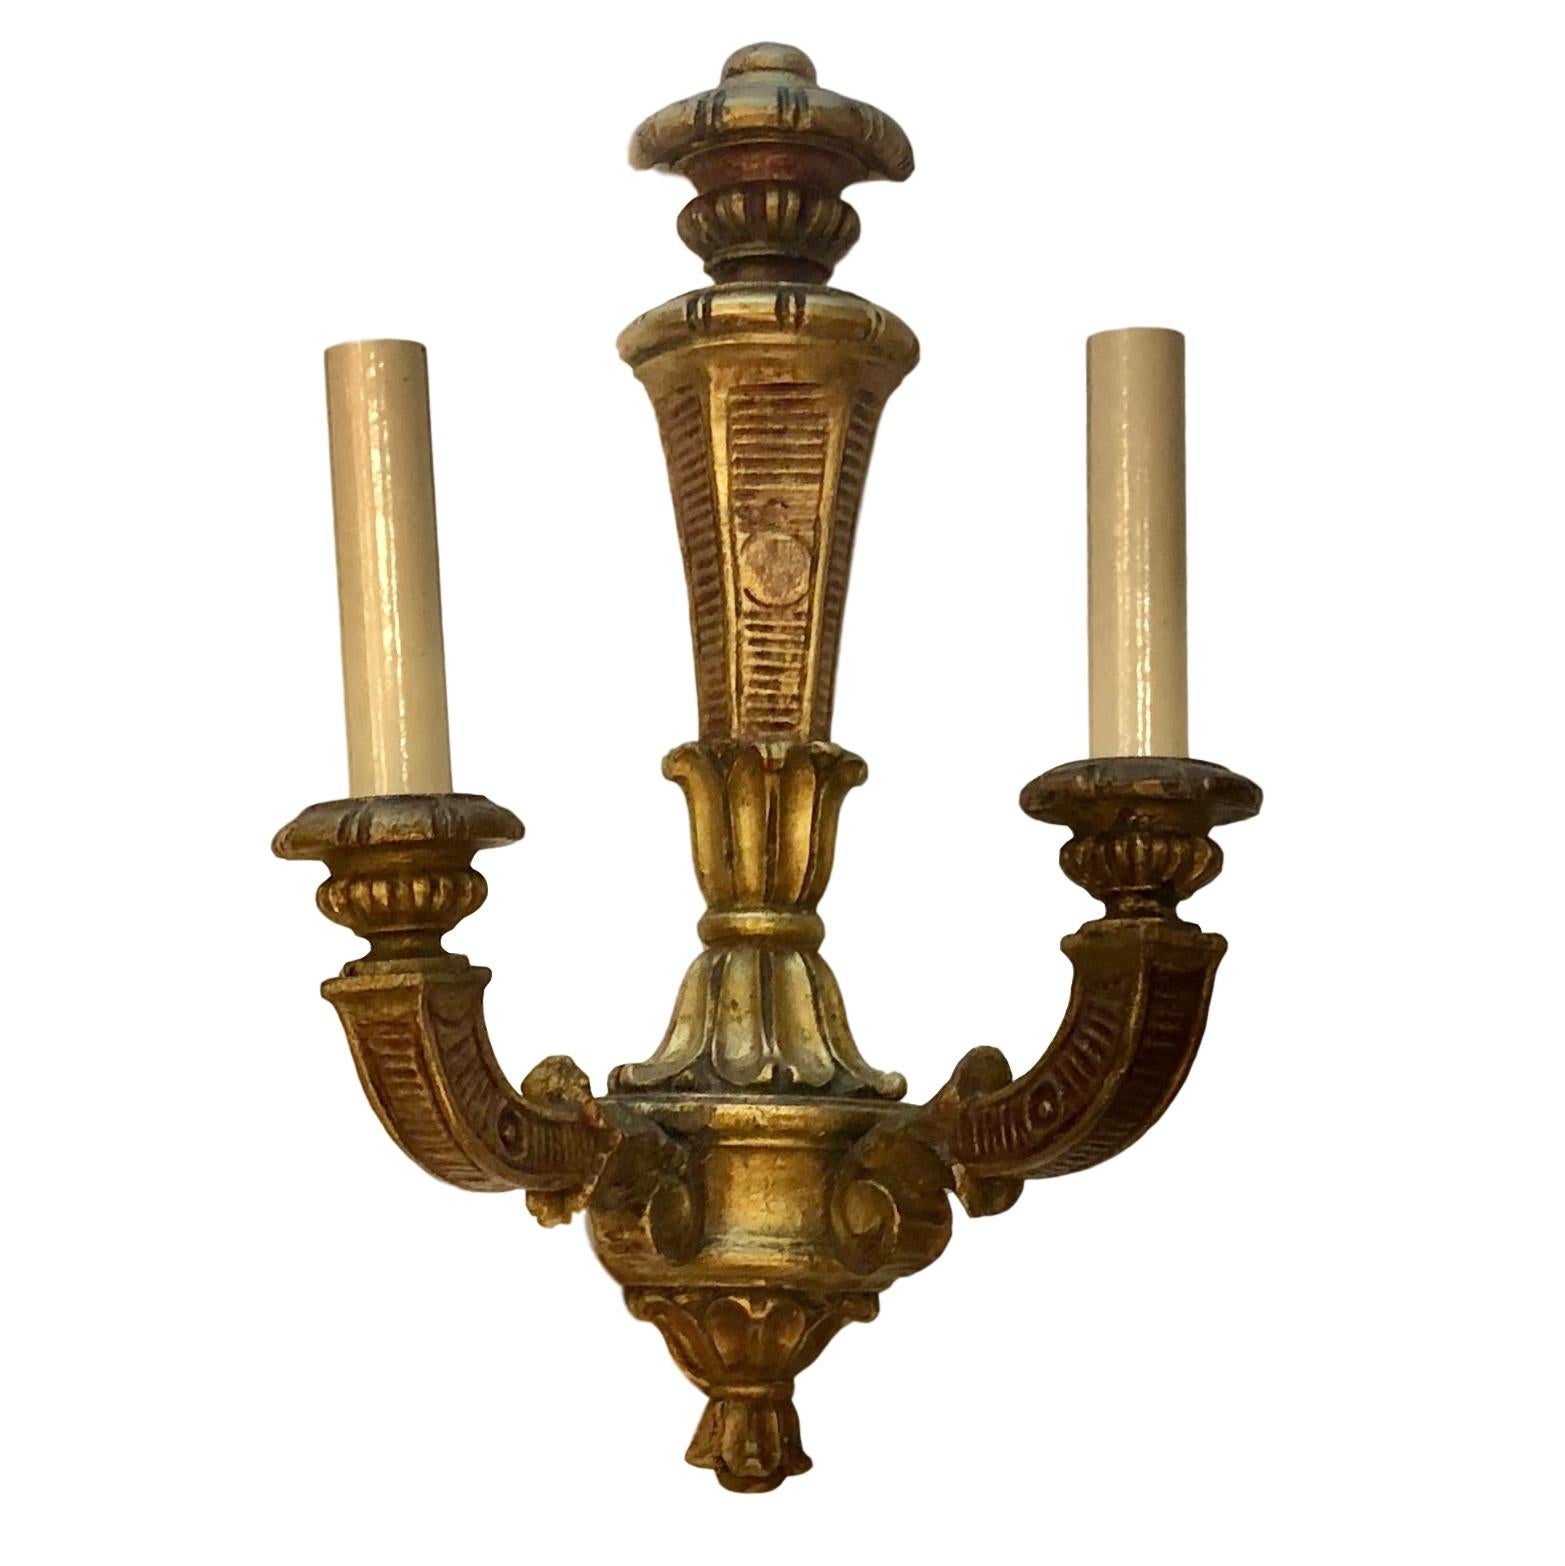 A pair of circa 1930s French neoclassic style, giltwood sconces with painted details.

Measurements:
Height 15